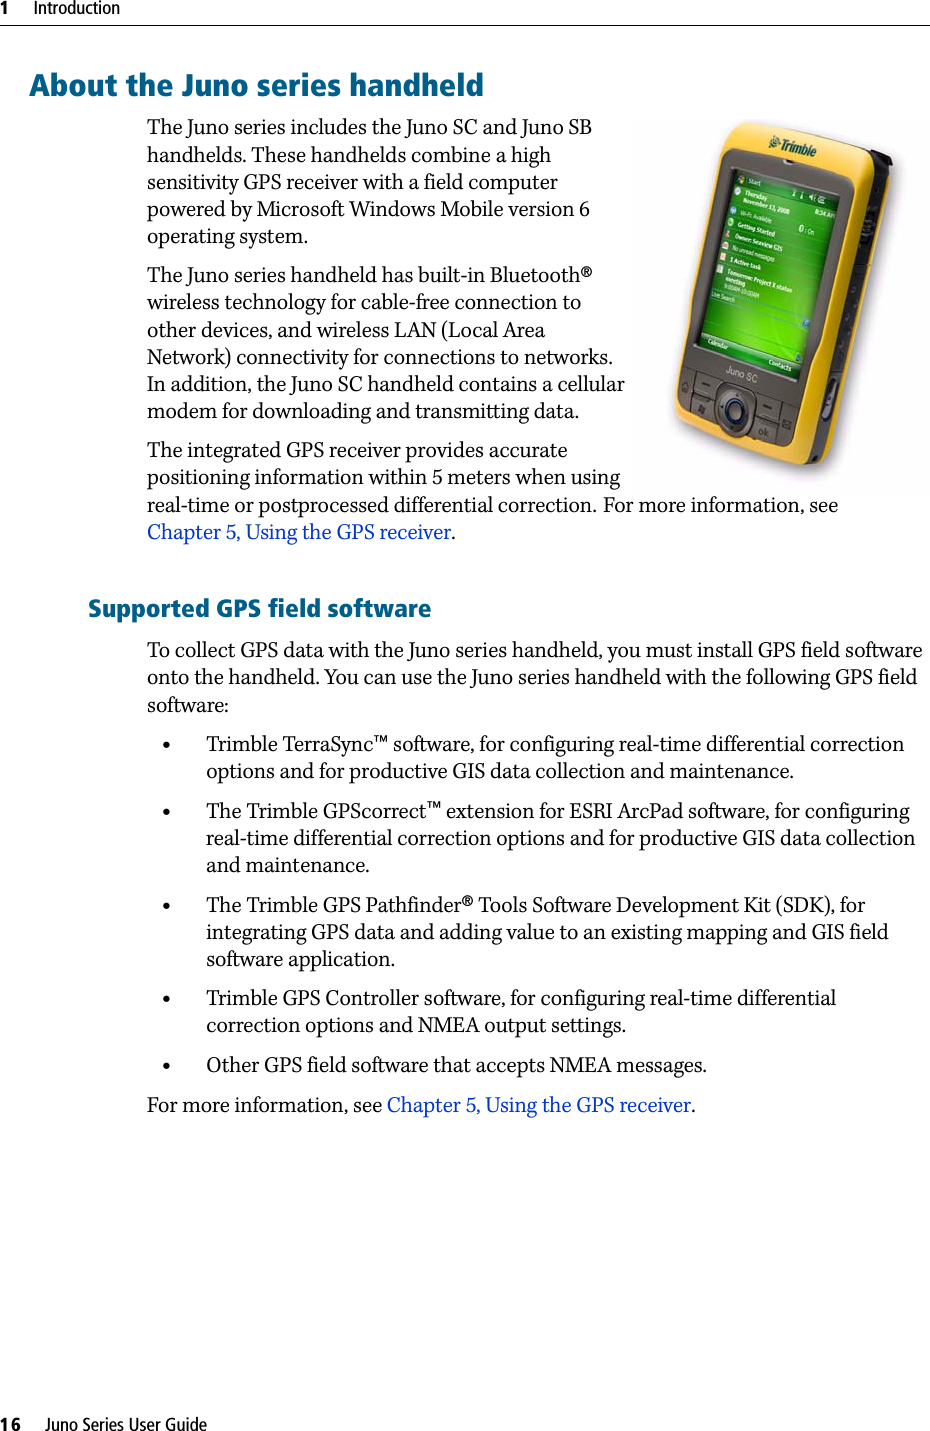 1     Introduction16     Juno Series User GuideAbout the Juno series handheldThe Juno series includes the Juno SC and Juno SB  handhelds. These handhelds combine a high sensitivity GPS receiver with a field computer powered by Microsoft Windows Mobile version 6 operating system. The Juno series handheld has built-in Bluetooth® wireless technology for cable-free connection to other devices, and wireless LAN (Local Area Network) connectivity for connections to networks. In addition, the Juno SC handheld contains a cellular modem for downloading and transmitting data.The integrated GPS receiver provides accurate positioning information within 5 meters when using real-time or postprocessed differential correction. For more information, see Chapter 5, Using the GPS receiver. Supported GPS field softwareTo collect GPS data with the Juno series handheld, you must install GPS field software onto the handheld. You can use the Juno series handheld with the following GPS field software:•Trimble TerraSync™ software, for configuring real-time differential correction options and for productive GIS data collection and maintenance.•The Trimble GPScorrect™ extension for ESRI ArcPad software, for configuring real-time differential correction options and for productive GIS data collection and maintenance.•The Trimble GPS Pathfinder® Tools Software Development Kit (SDK), for integrating GPS data and adding value to an existing mapping and GIS field software application.•Trimble GPS Controller software, for configuring real-time differential correction options and NMEA output settings.•Other GPS field software that accepts NMEA messages.For more information, see Chapter 5, Using the GPS receiver.